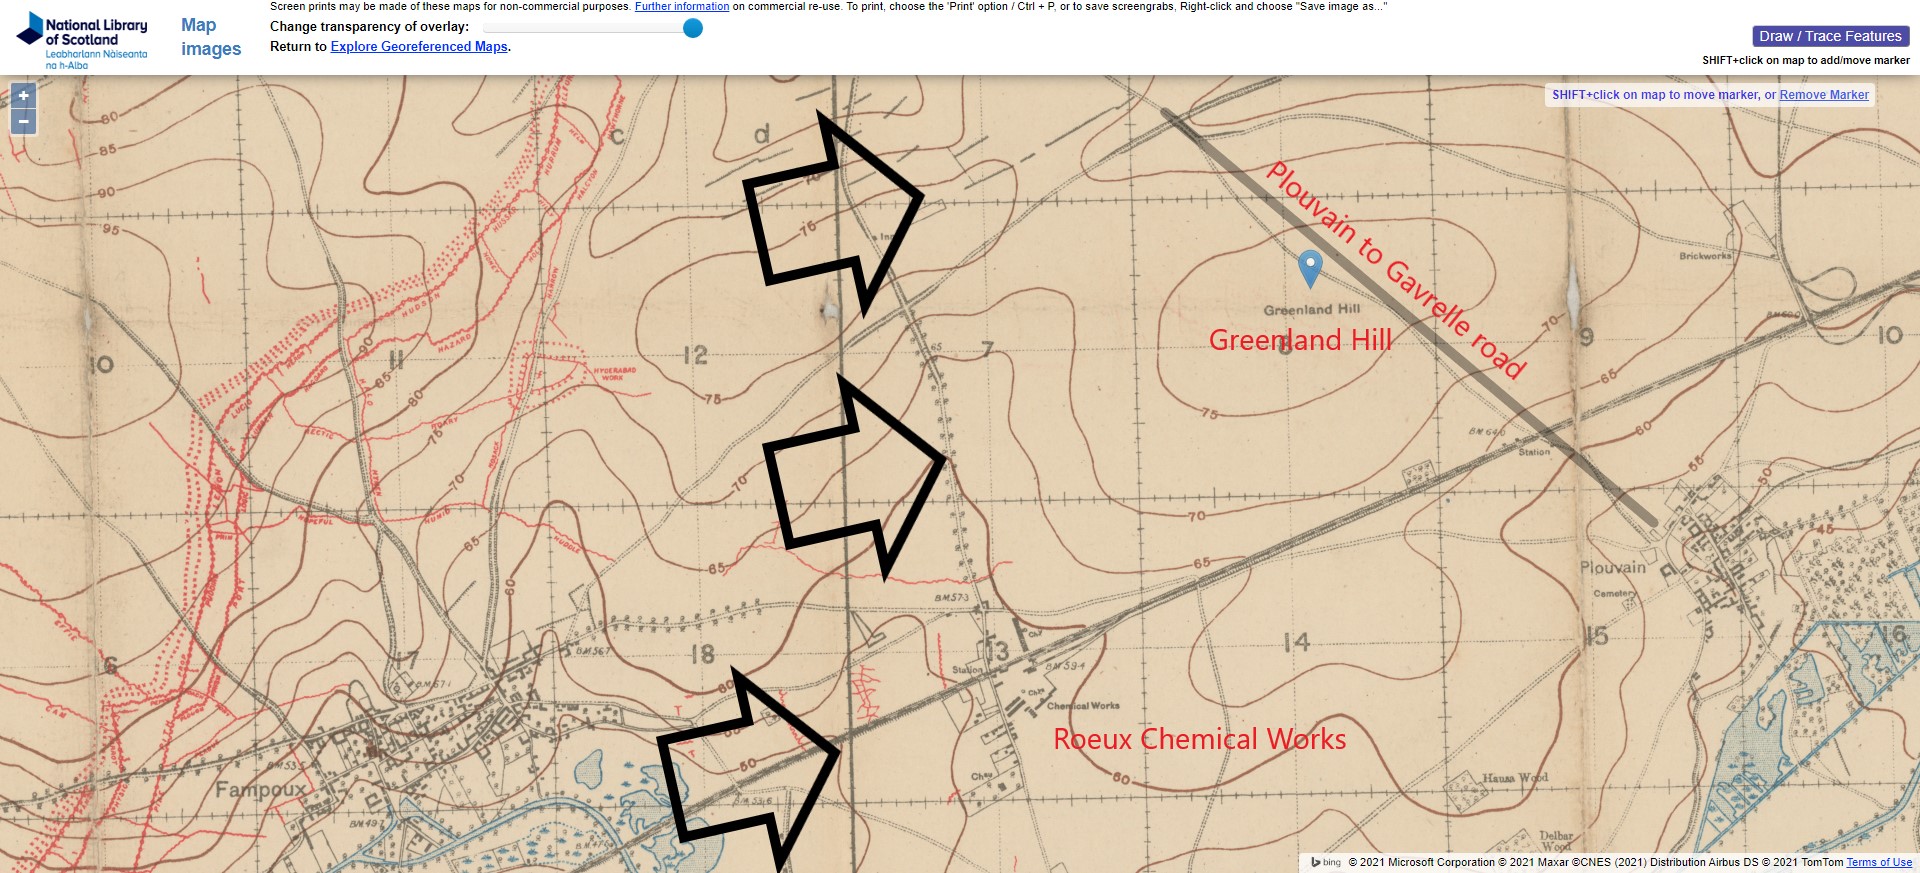 NLS WWI Trench Map Greenland Hill Ano